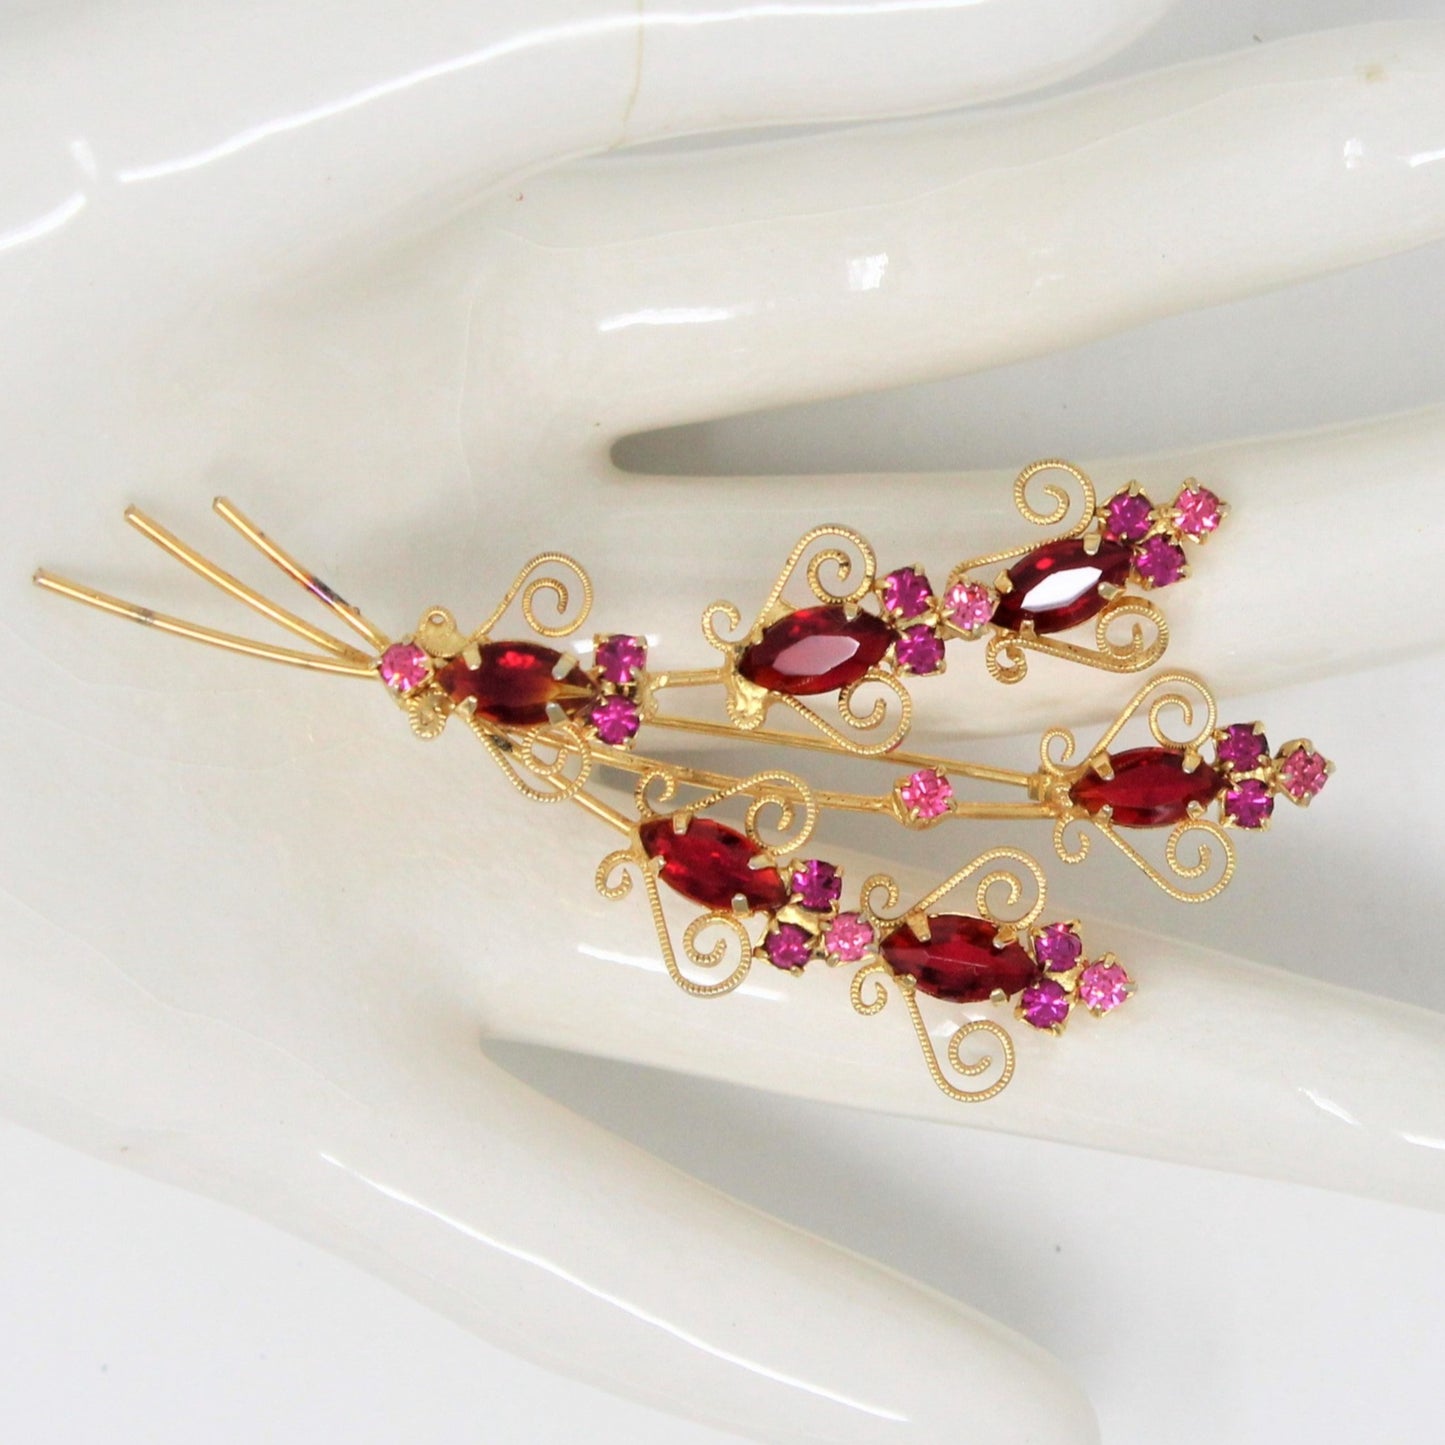 Brooch / Pin, Floral Bouquet, Red and Pink Rhinestones, Gold Filigree, Vintage